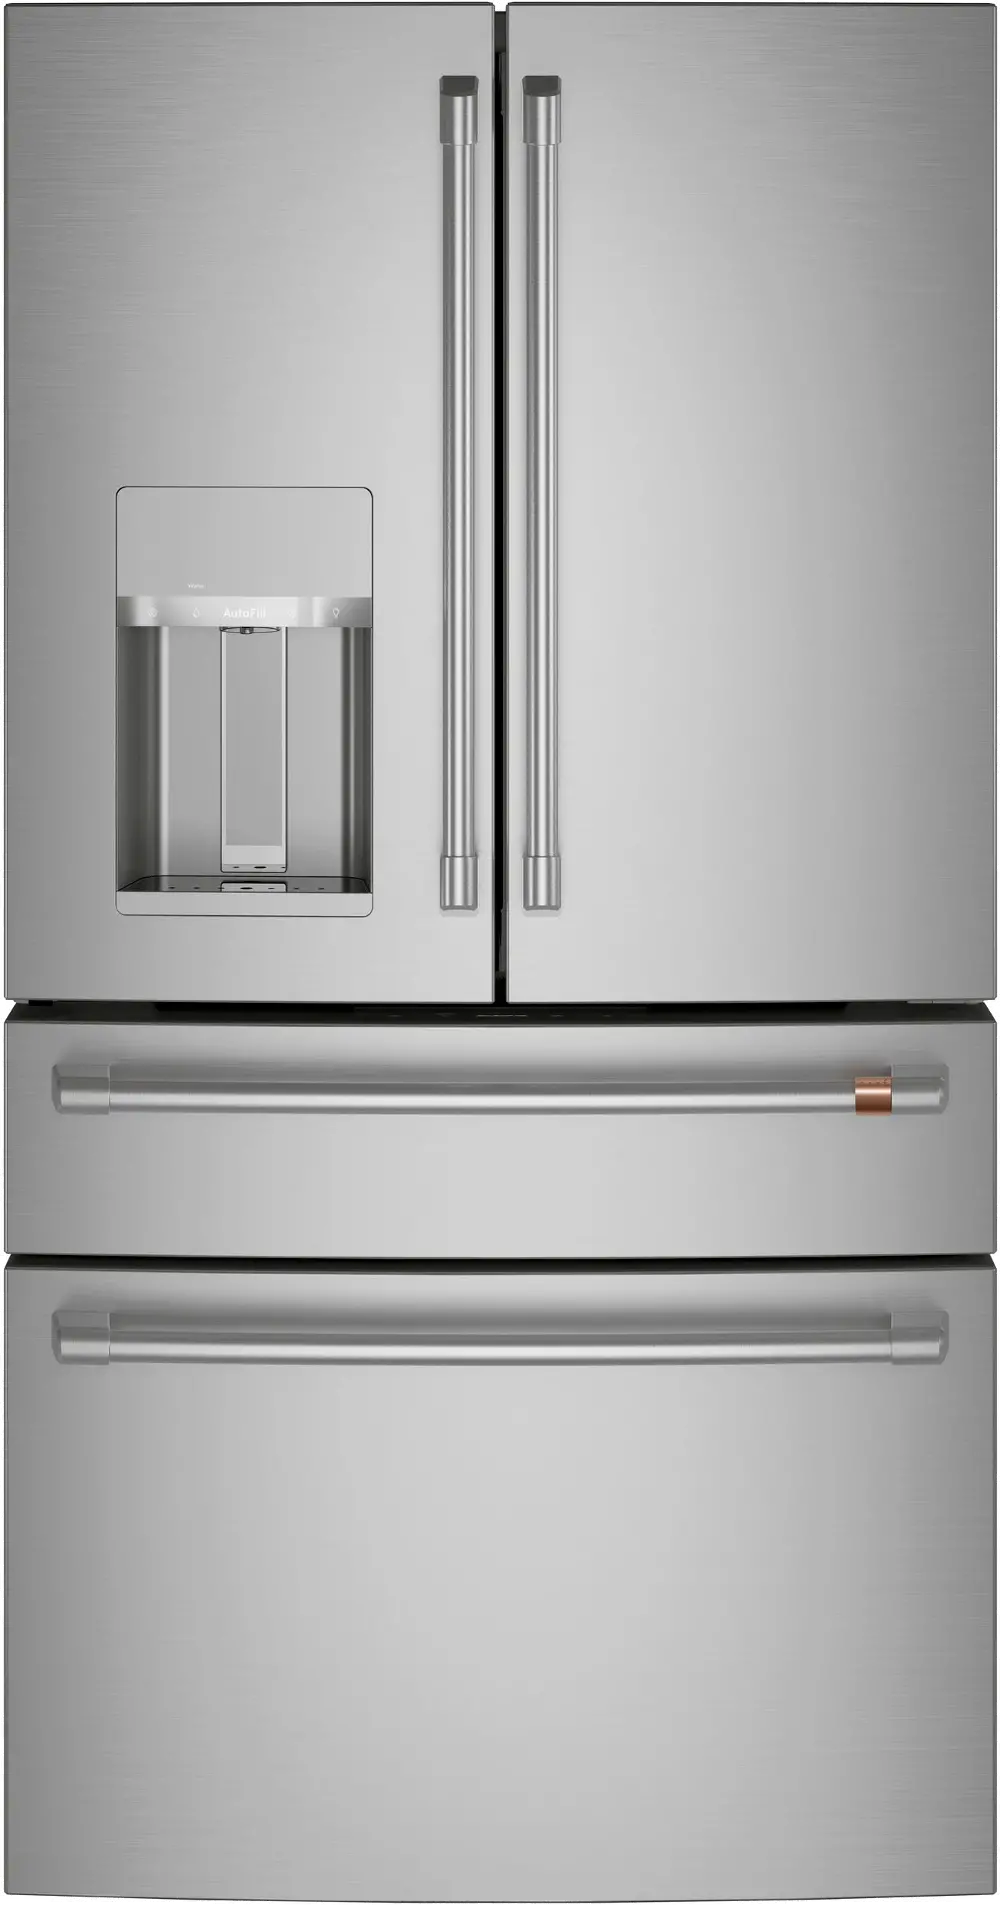 CXE22DP2PS1 Cafe 22.3 cu ft French Door Refrigerator - Stainless Steel-1